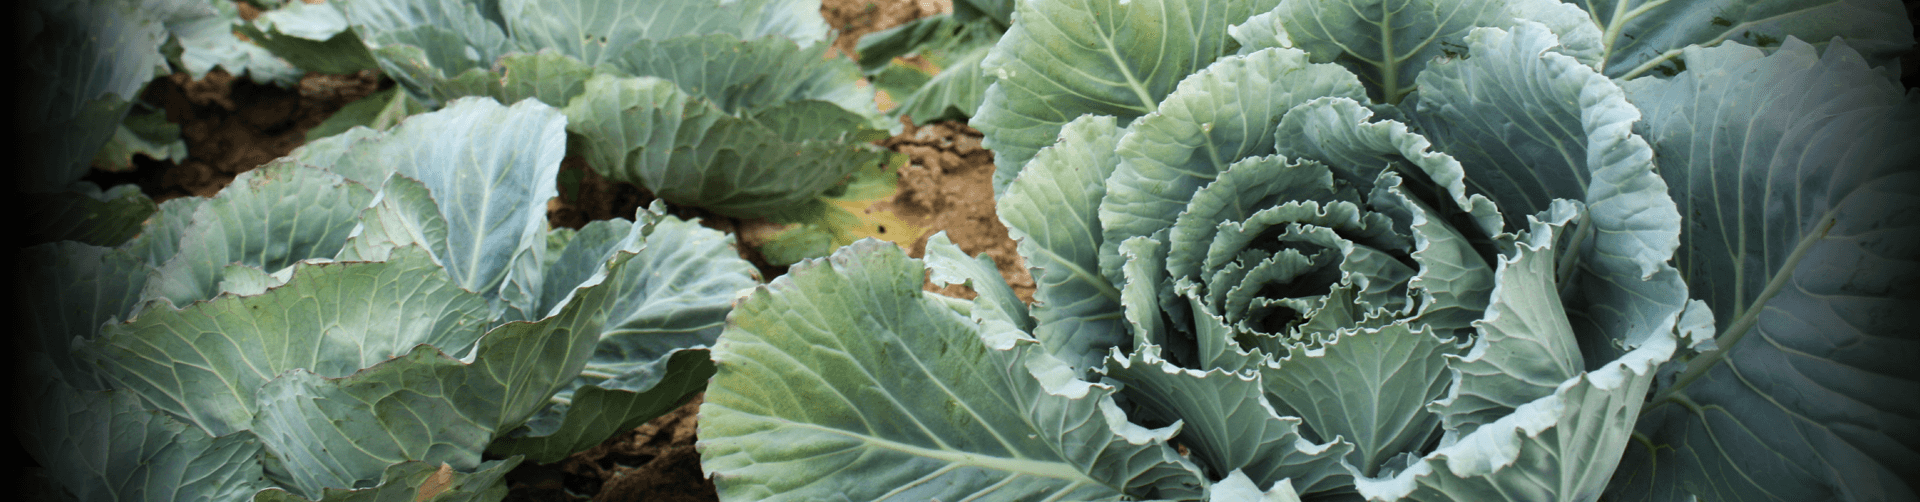 Cabbage from a GLK Foods farm